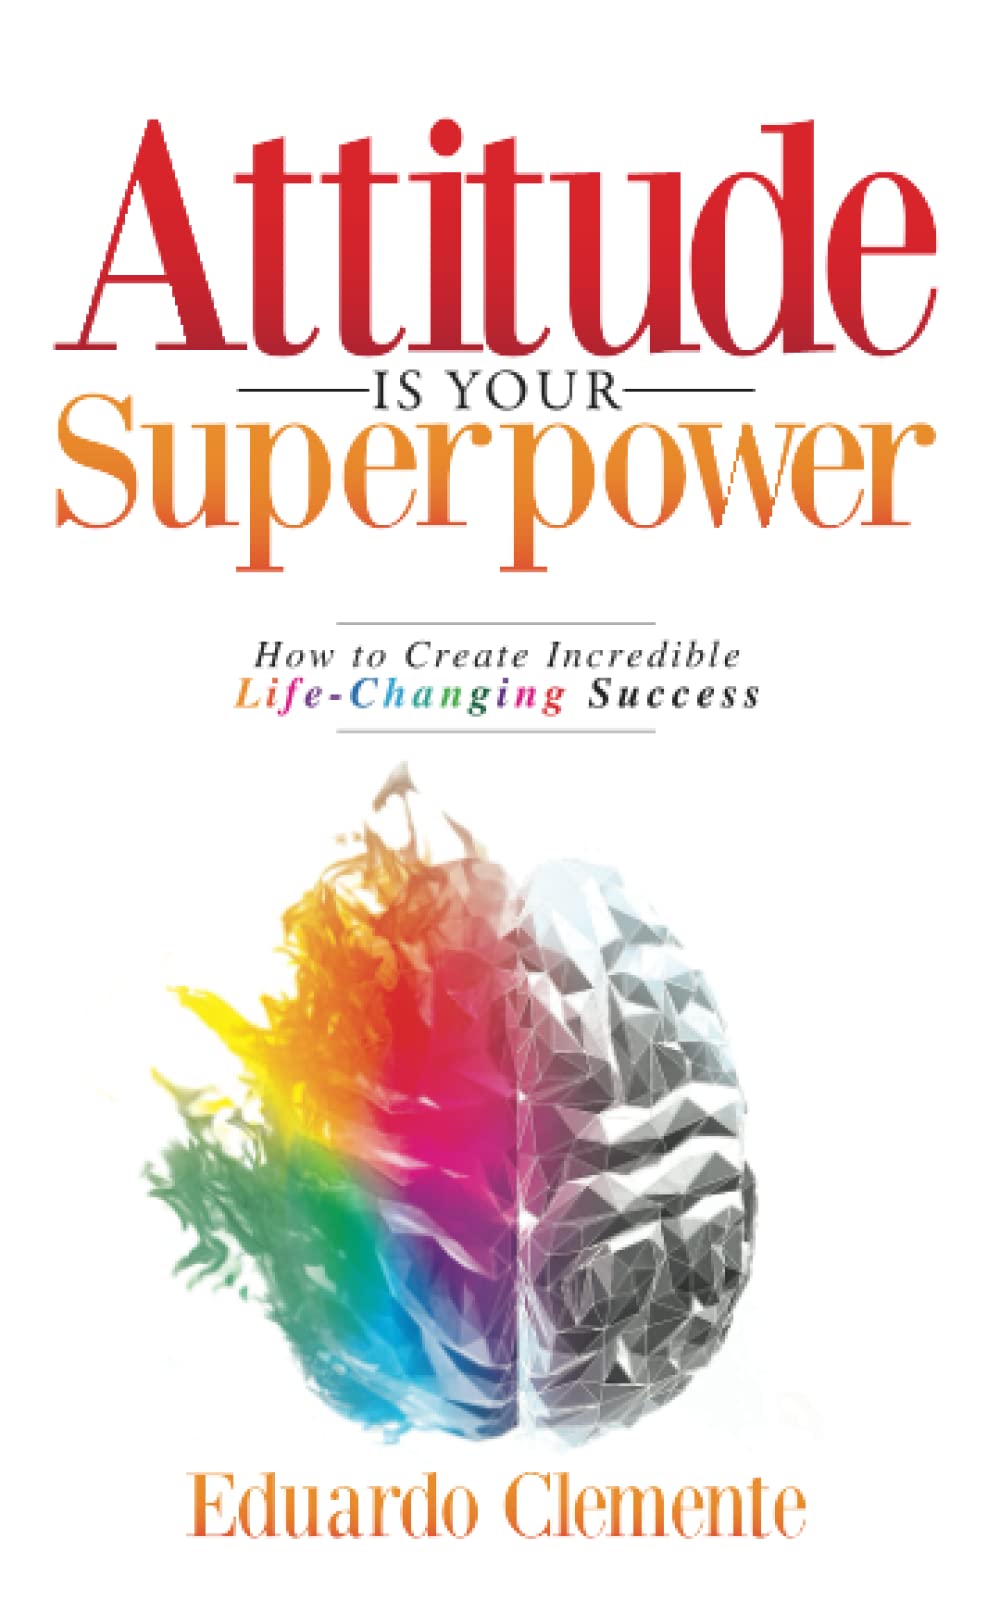 ATTITUDE IS YOUR SUPERPOWER by EDUARDO CLEMENTE